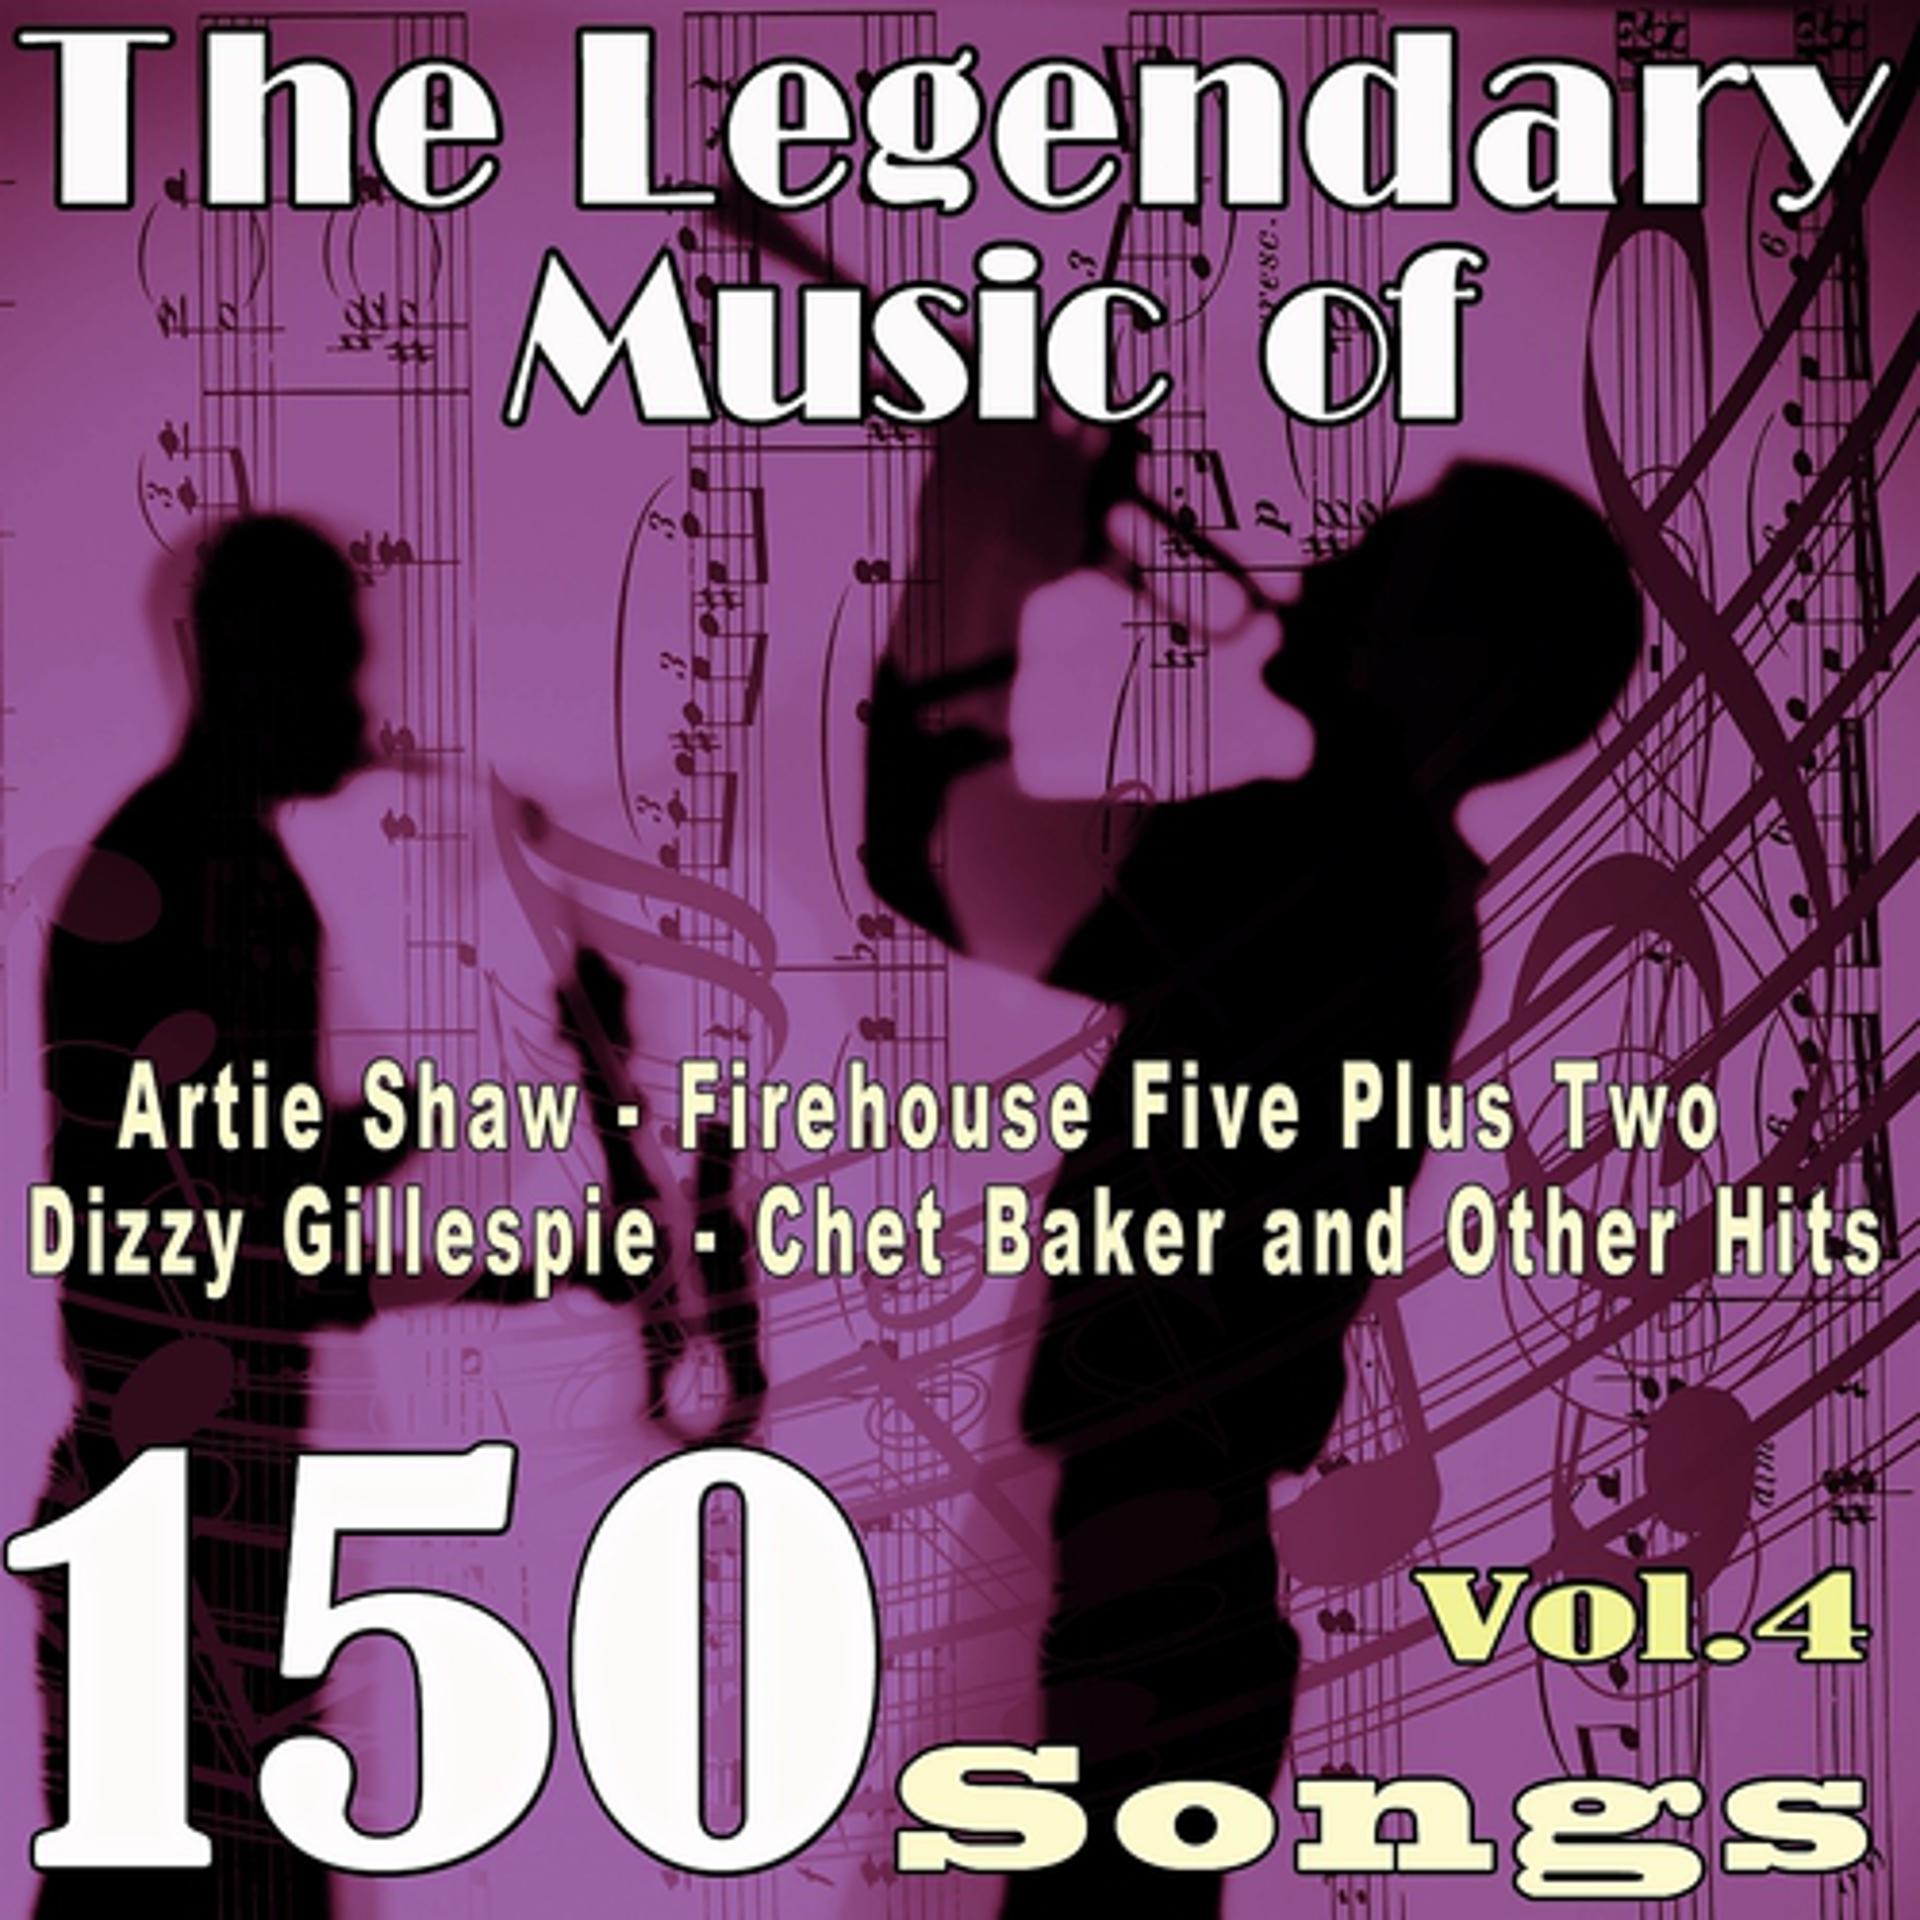 Постер альбома The Legendary Music of Artie Shaw, Firehouse Five plus Two, Dizzy Gillespie, Chet Baker and Other Hits, Vol. 4